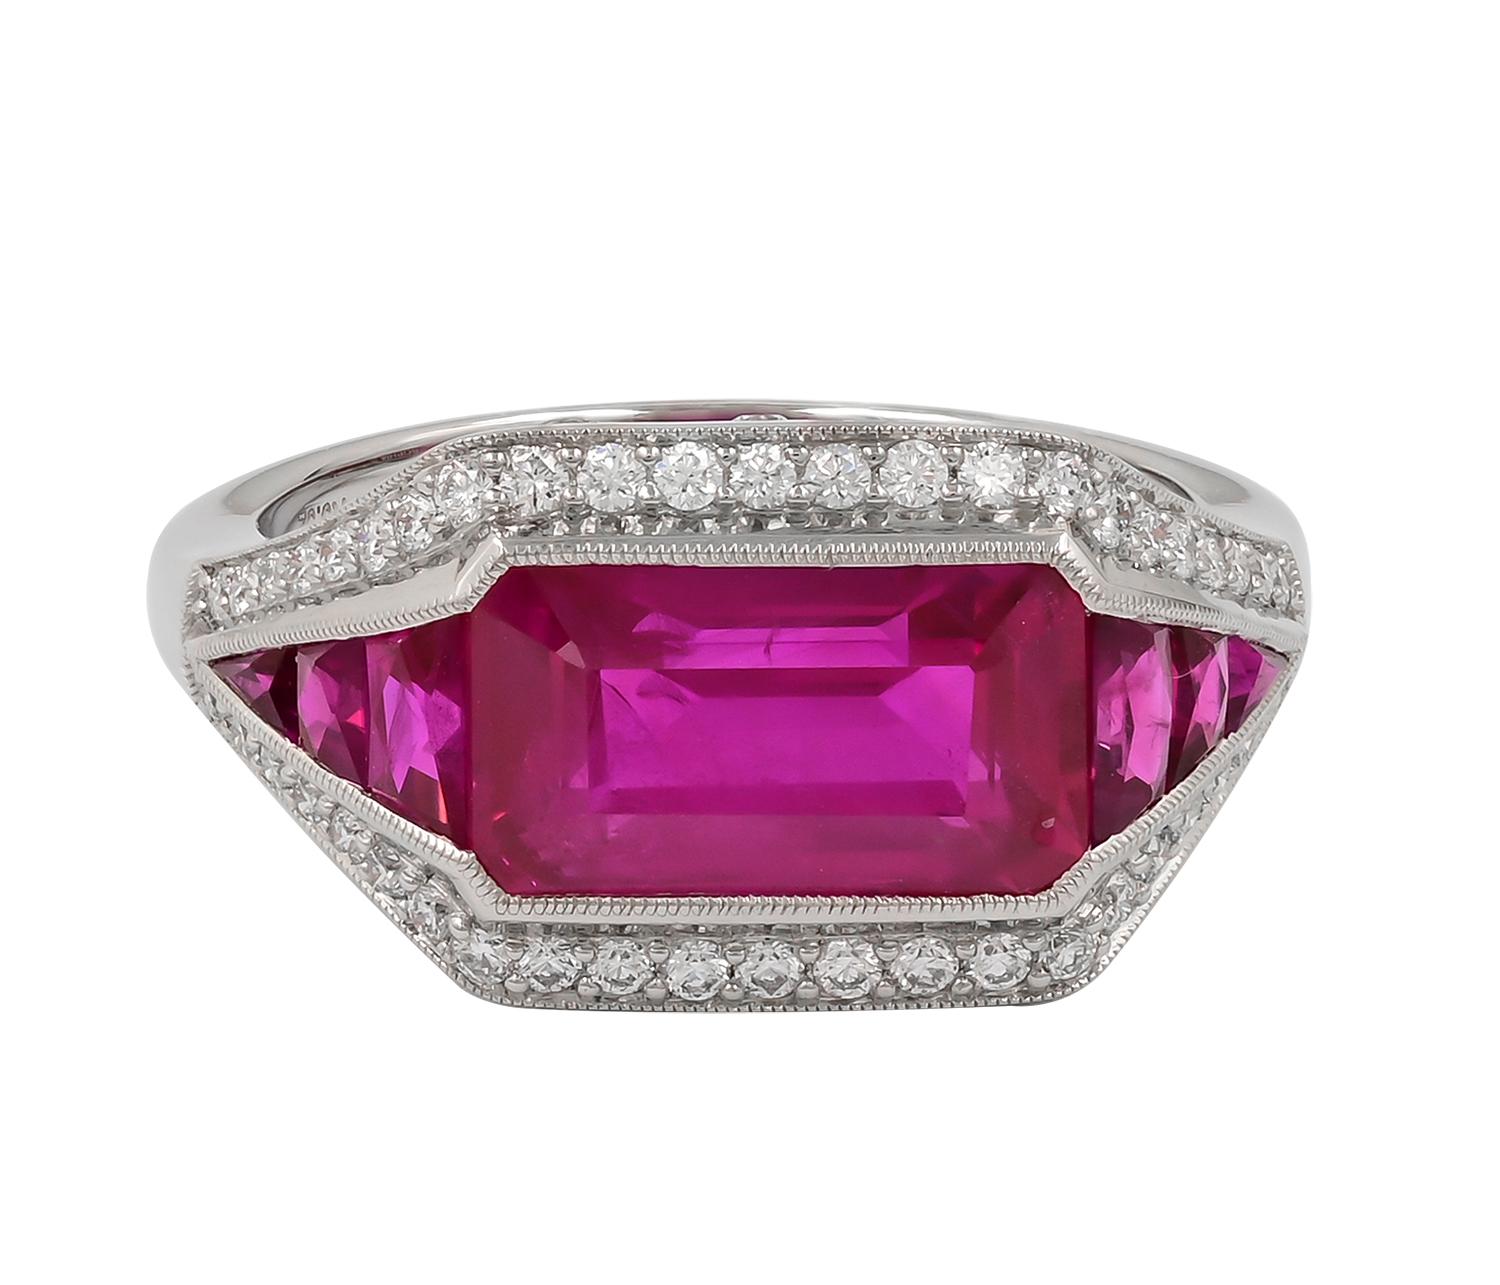 Ruby and Diamond ring by Sophia D. The ring features a 3.52 carat Ruby with 0.59 Carat Diamonds Flanked with 0.45 Carat Rubies Art Deco set in platinum. 

